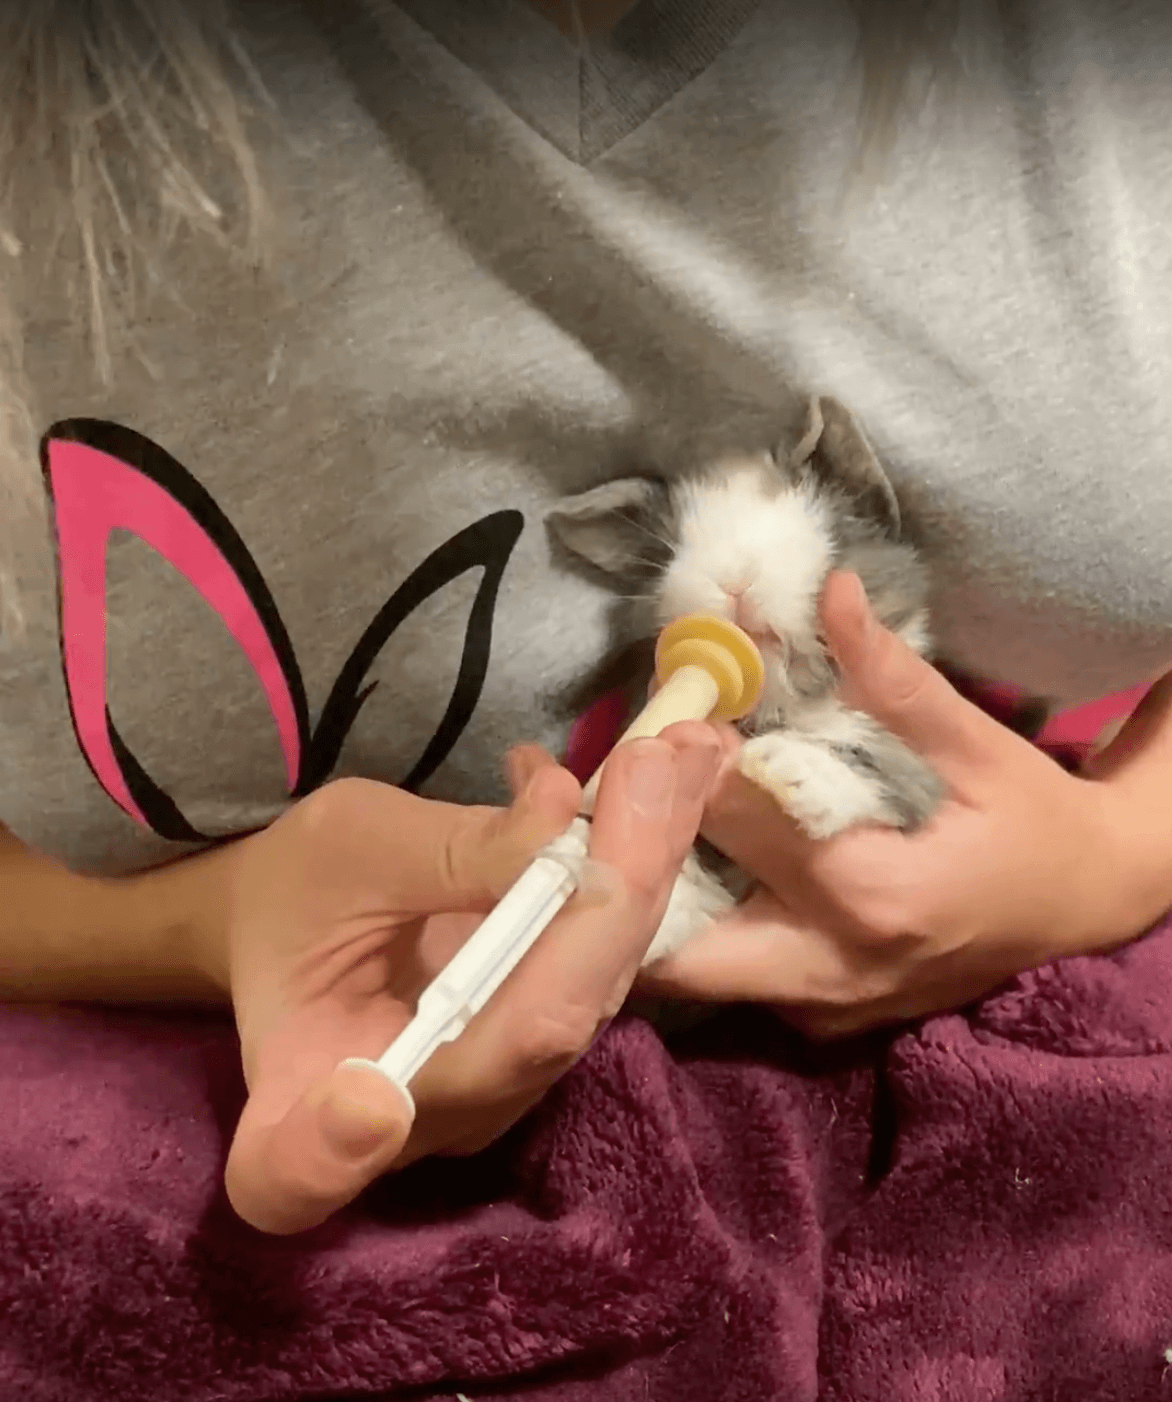 Caty's hands are shown feeding a baby white and gray bunny with a syringe.